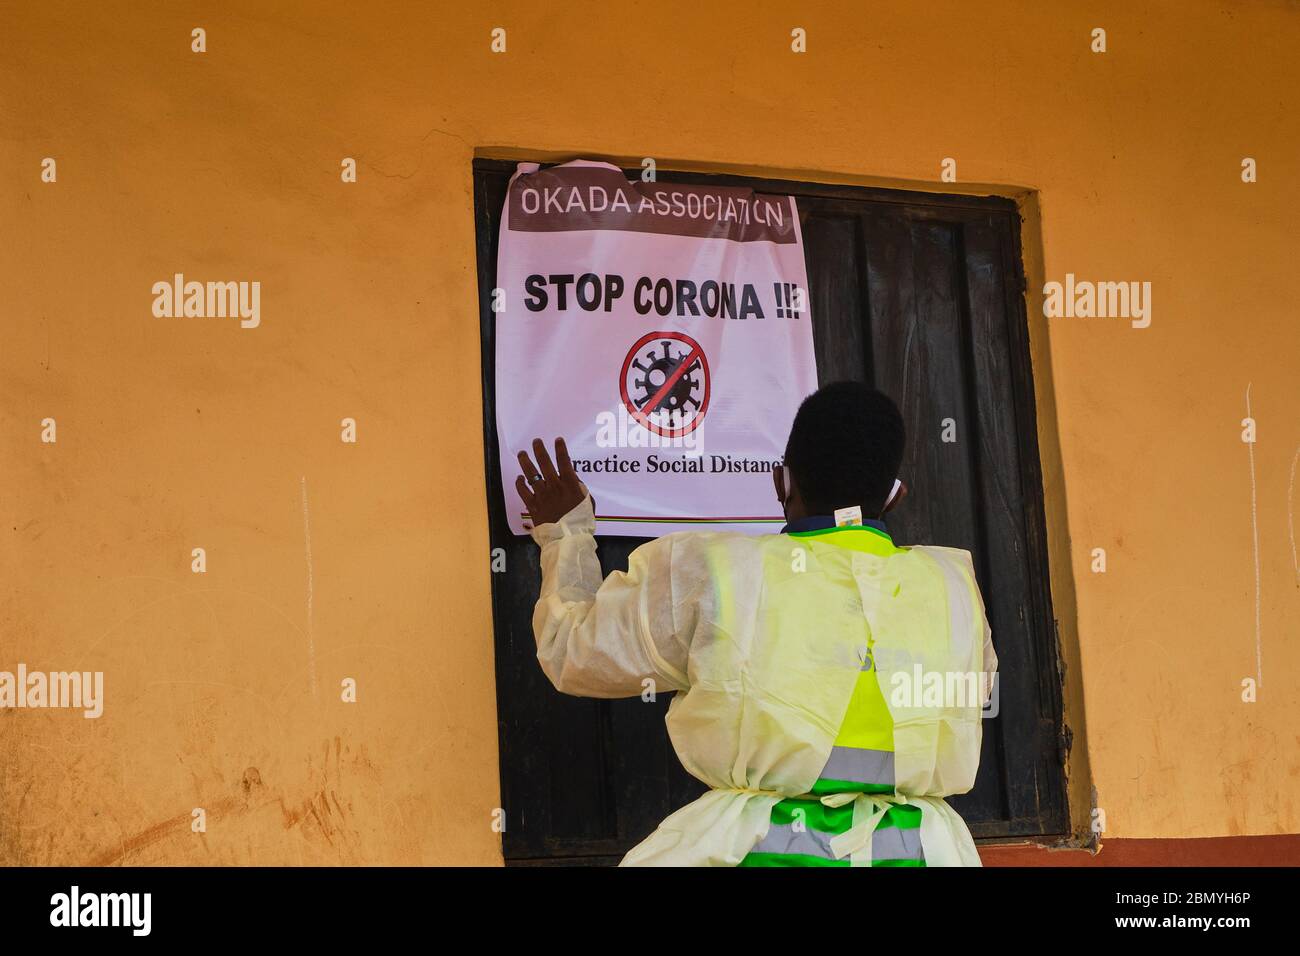 A man puts up a banner at a venue for a Social Distancing Advocacy program held by a government agency in Lagos, Nigeria. Stock Photo